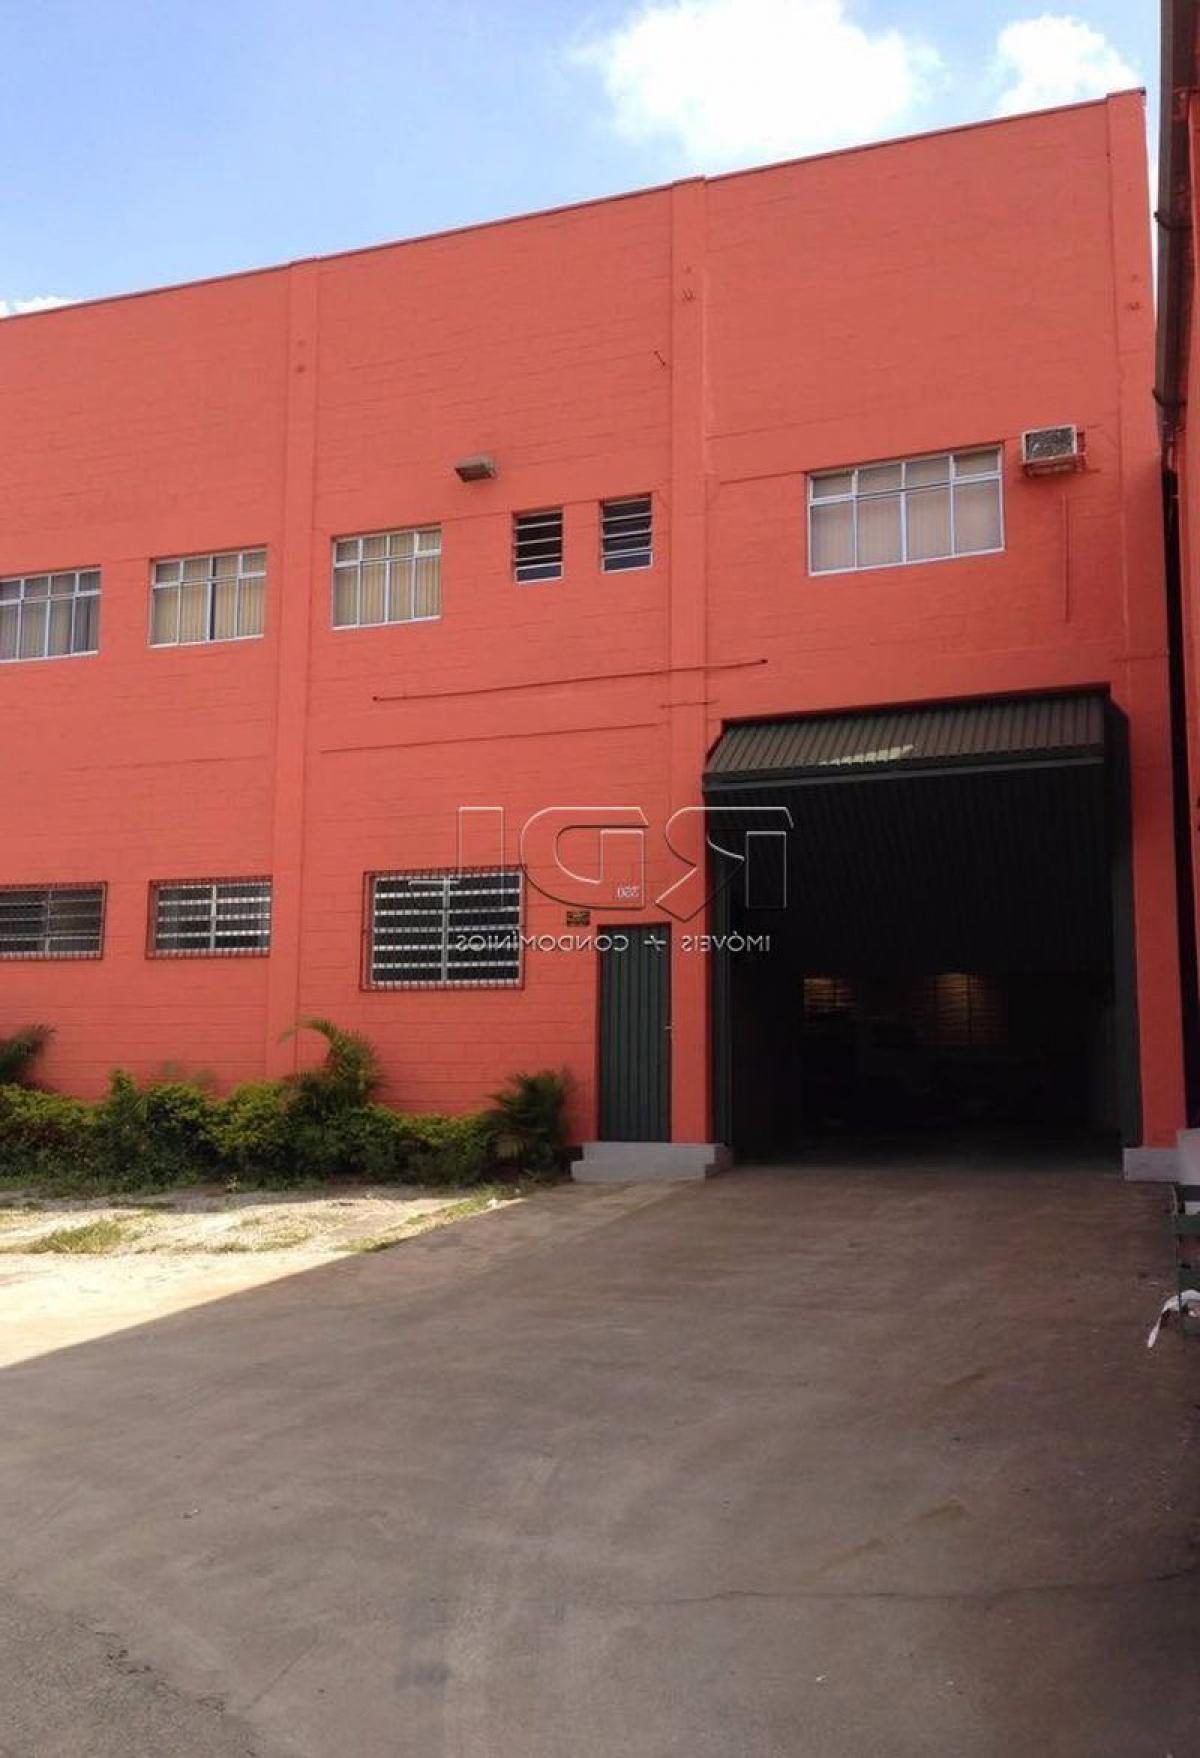 Picture of Commercial Building For Sale in Maua, Sao Paulo, Brazil